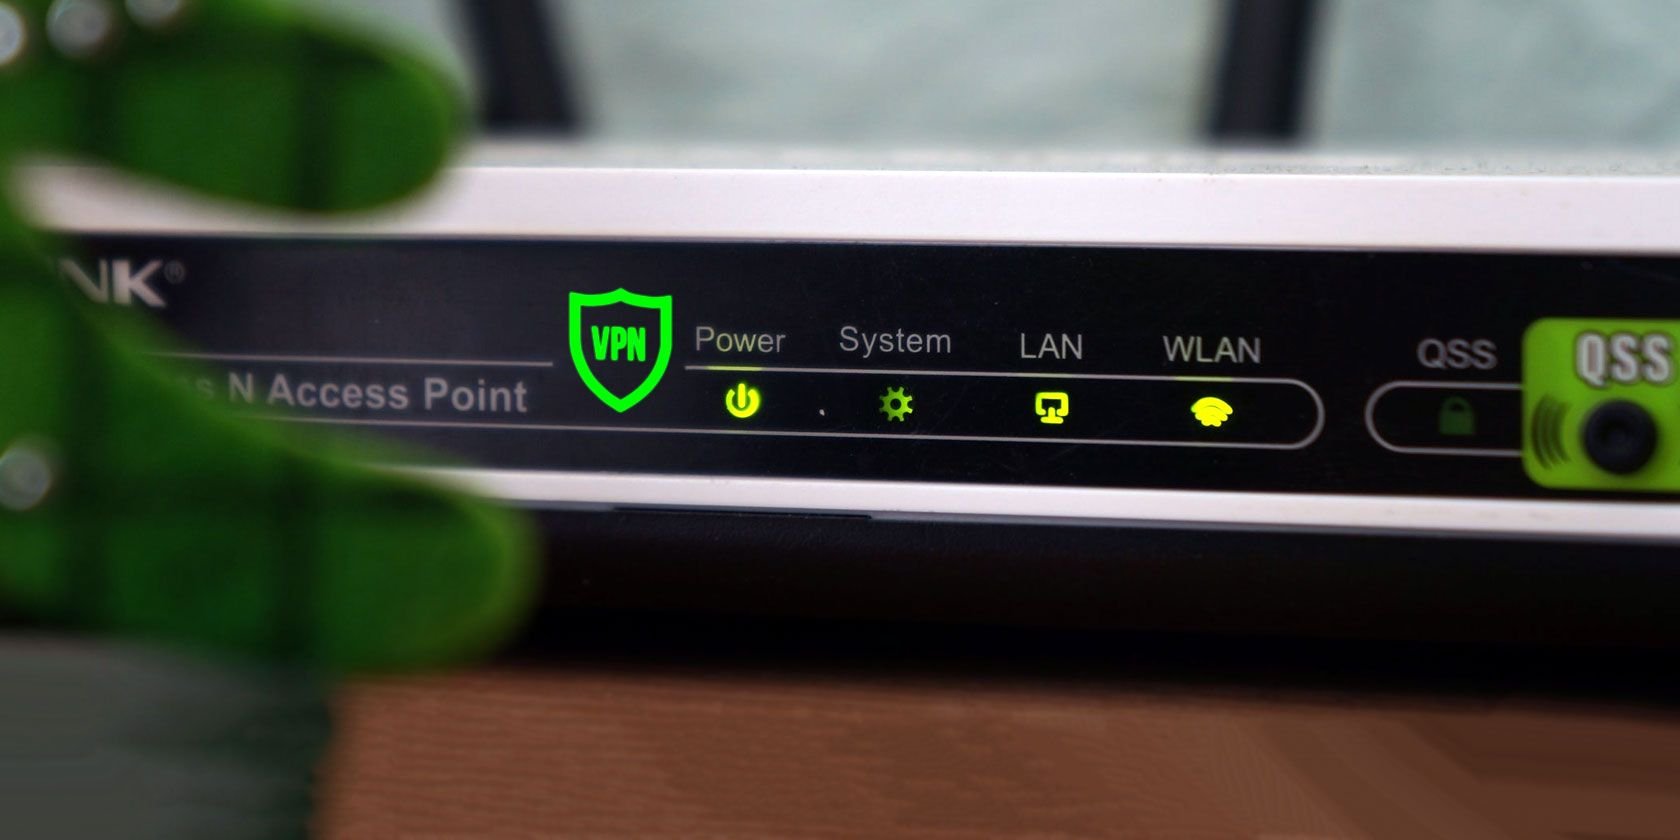 7 Simple Tips to Secure Your Router and Wi-Fi Network in Minutes